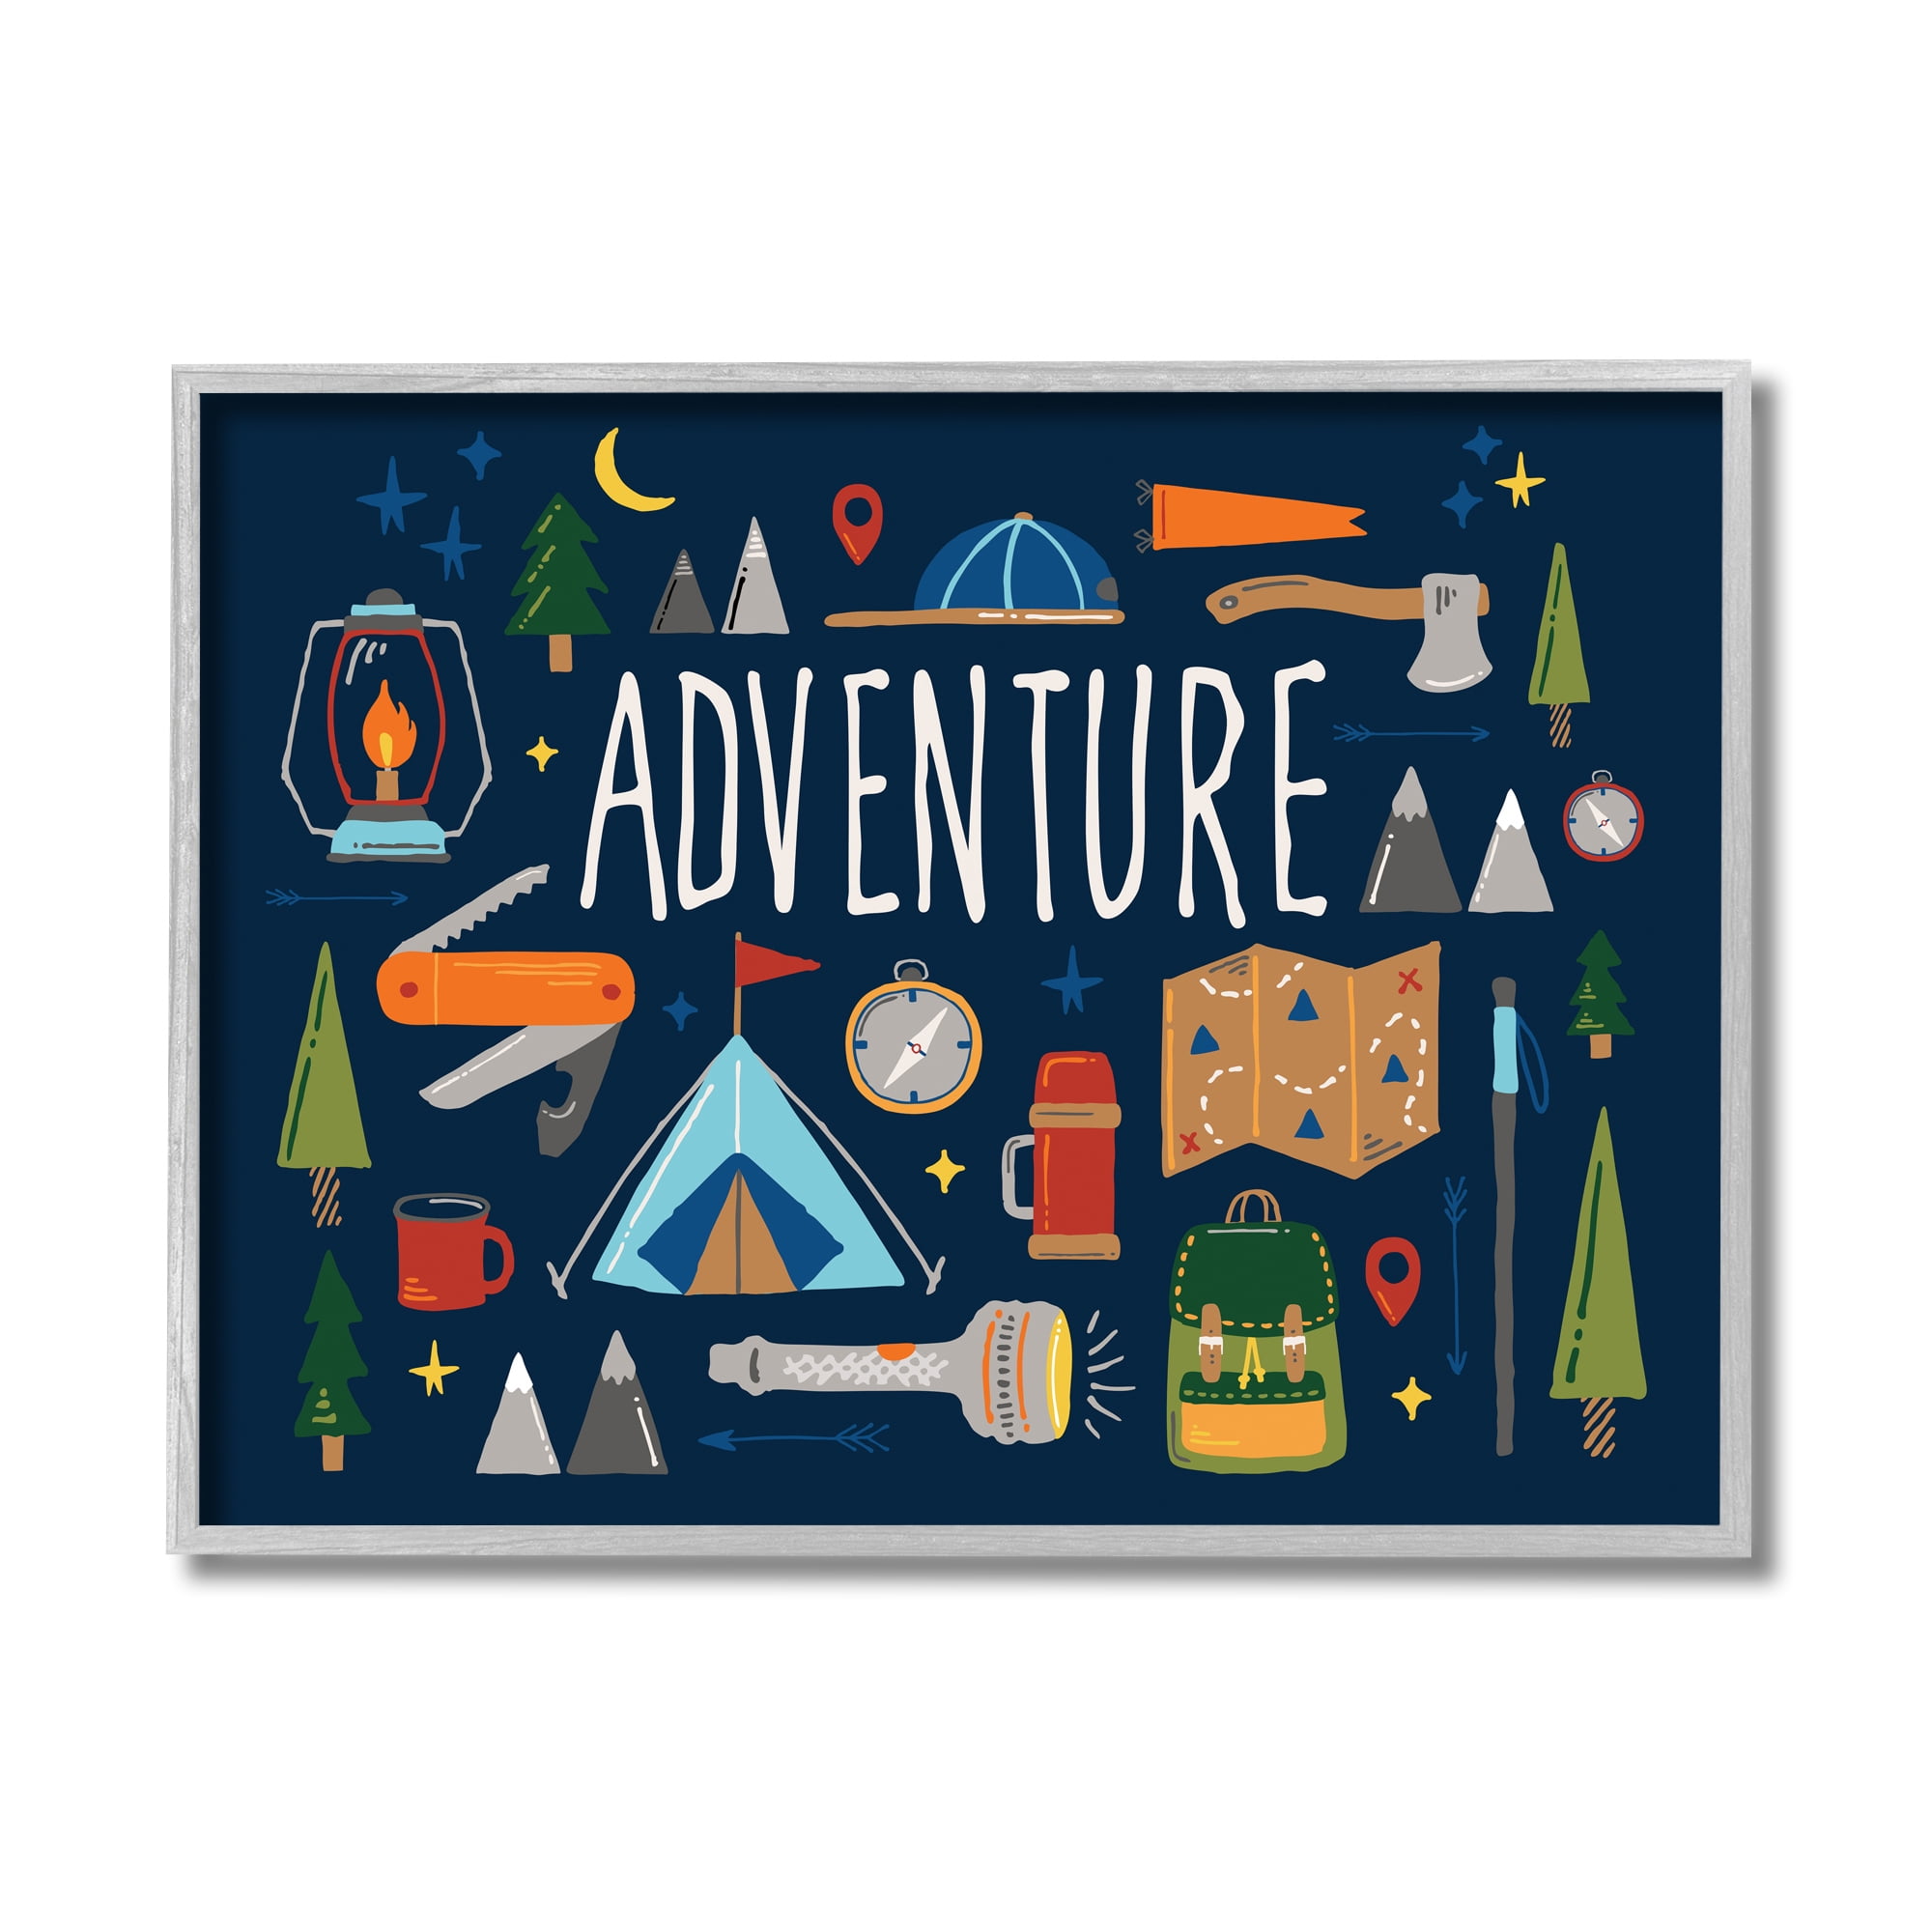 Adventure Sentiment Outdoor Camping Necessities 20 in x 16 in Framed  Painting Art Prints, by Stupell Home Décor